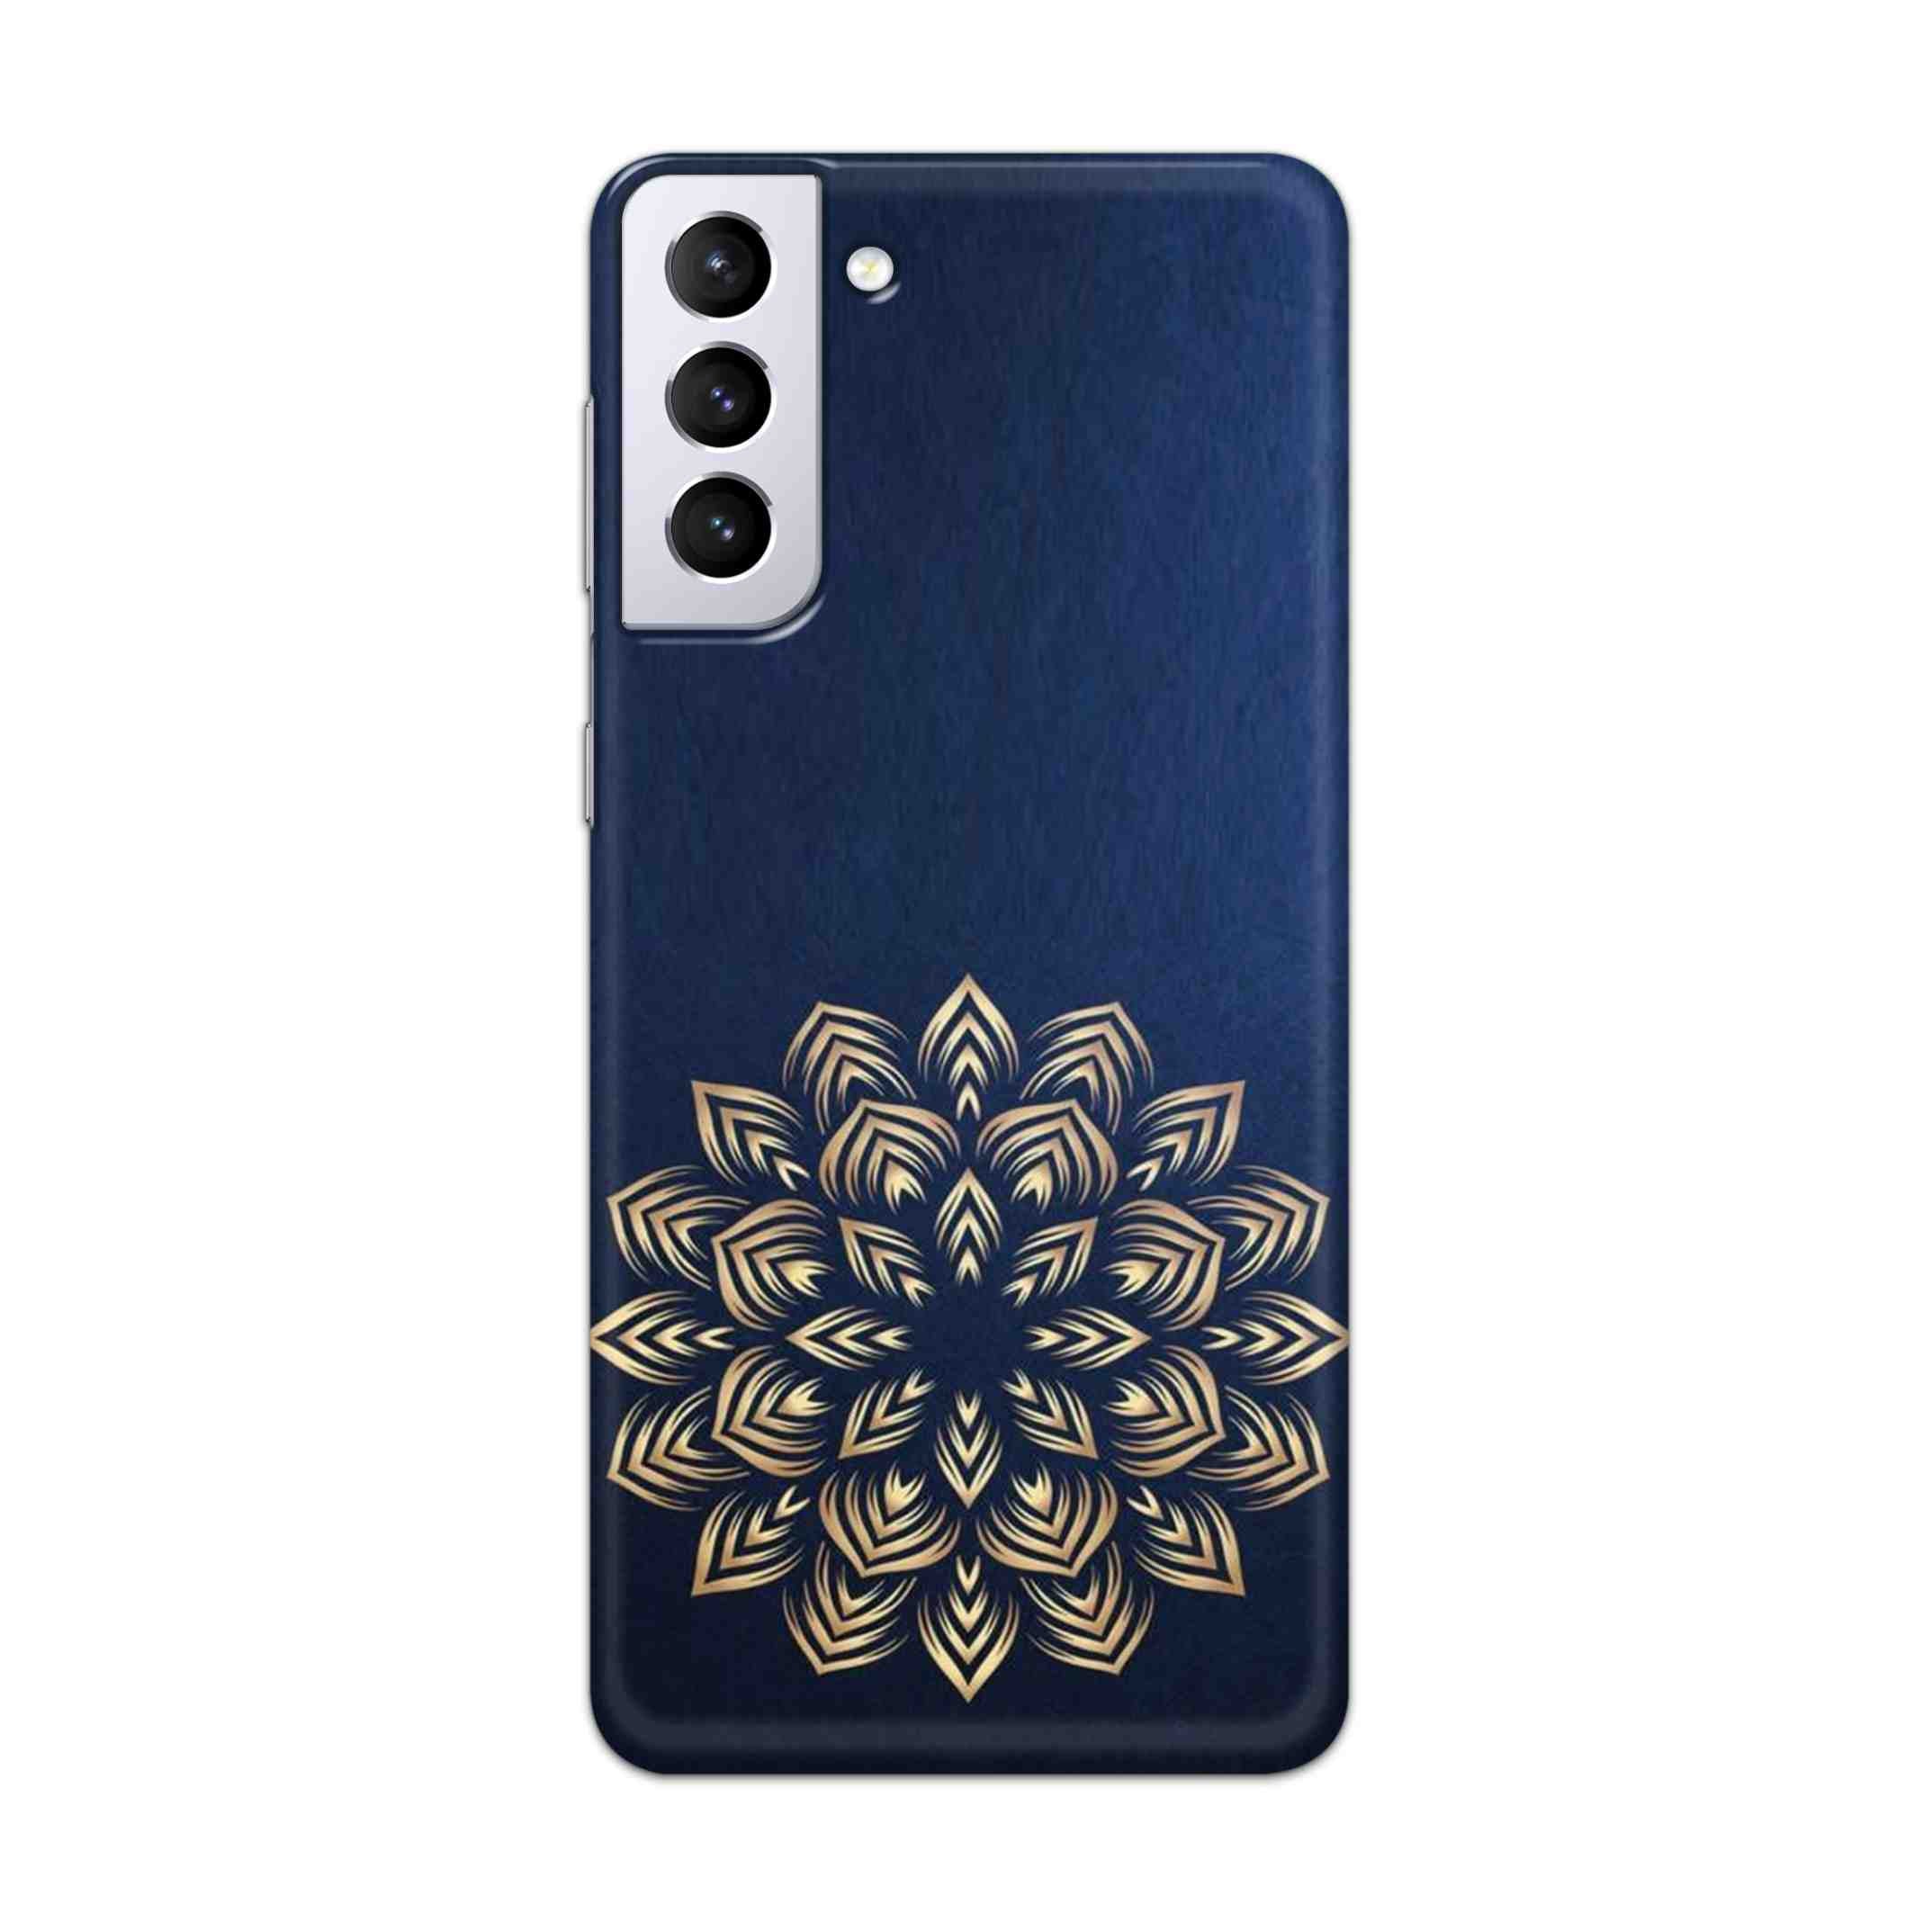 Buy Heart Mandala Hard Back Mobile Phone Case Cover For Samsung Galaxy S21 Plus Online